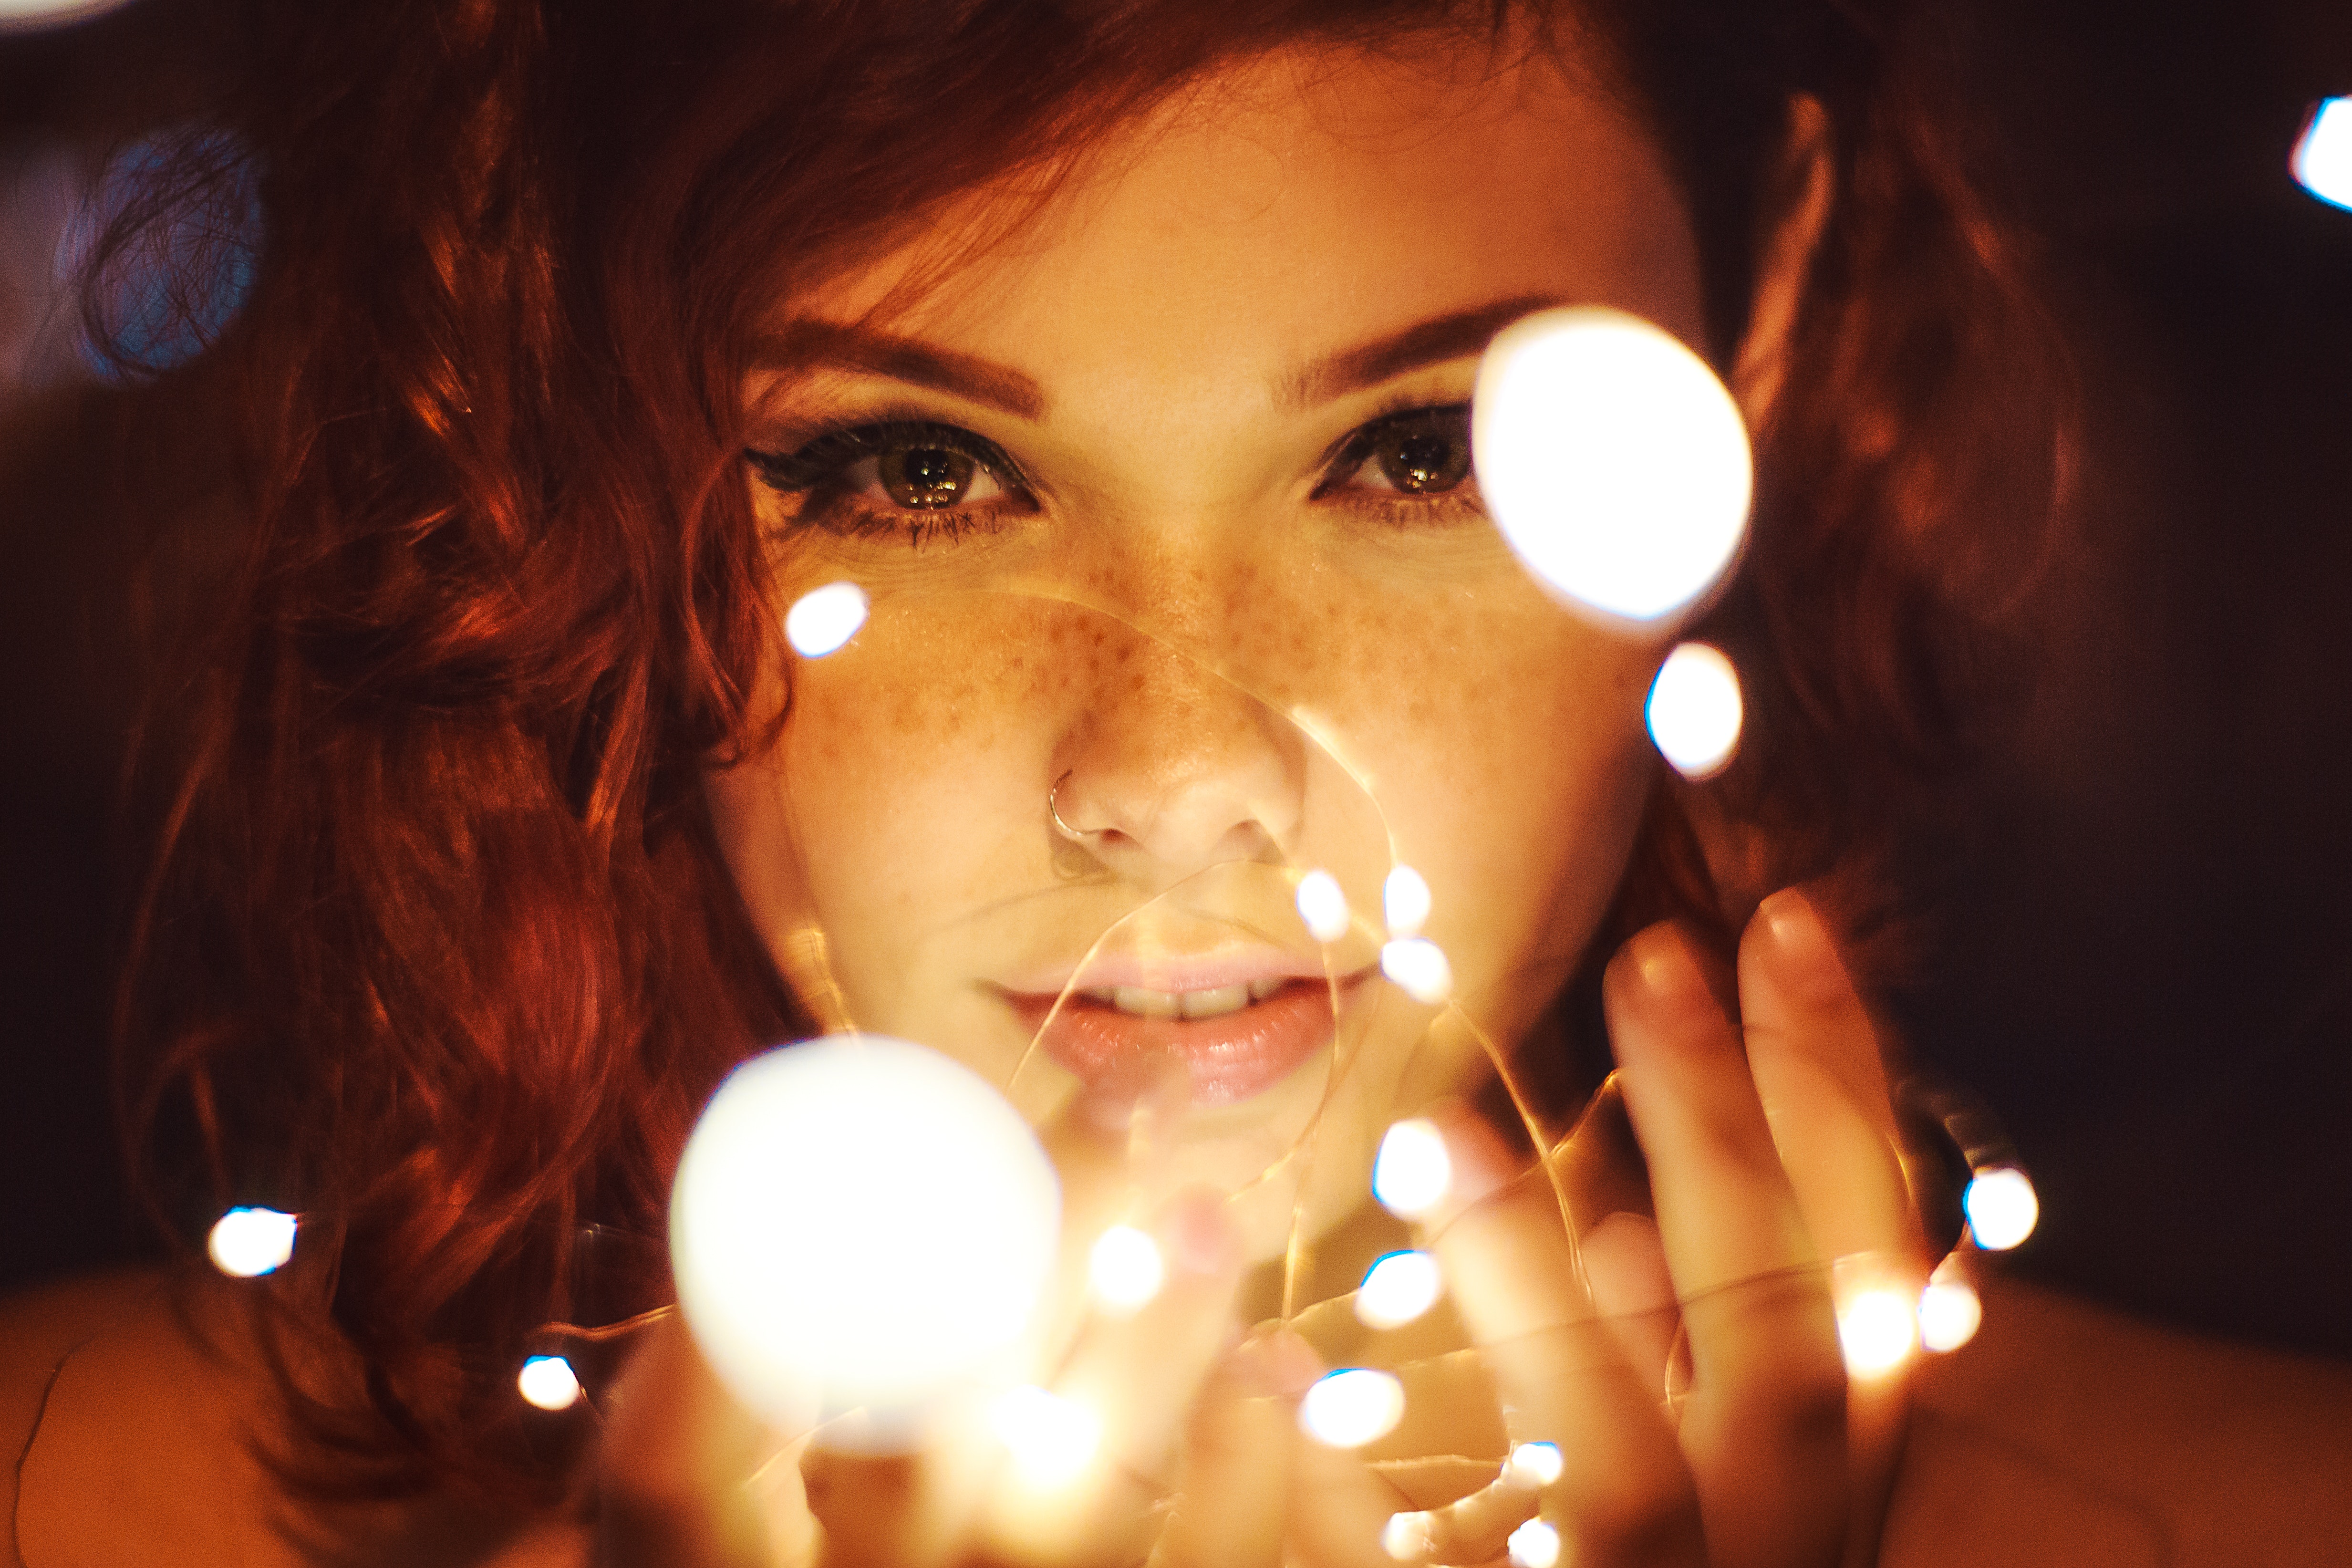 Photography of a Woman Holding Lights, Attractive, Happy, Woman, Smiling, HQ Photo